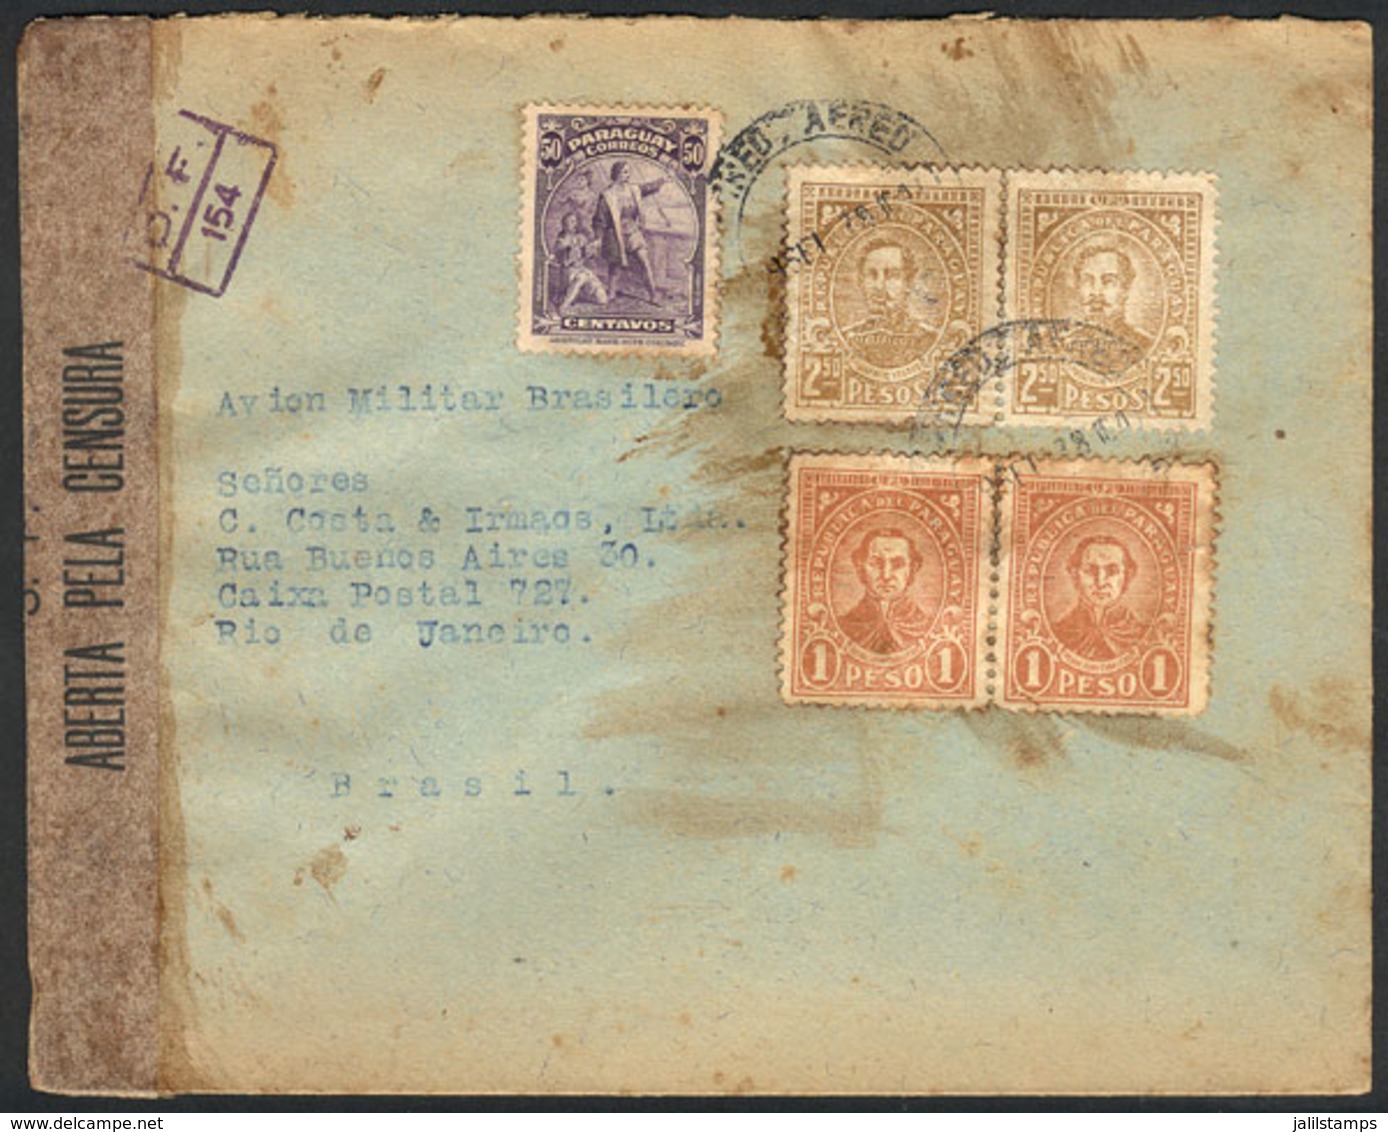 PARAGUAY: Cover Sent From Asunción To Rio De Janeiro On 9/SE/1938 By "BRAZILIAN MILITARY AIRPLANE", Censored At Destinat - Paraguay